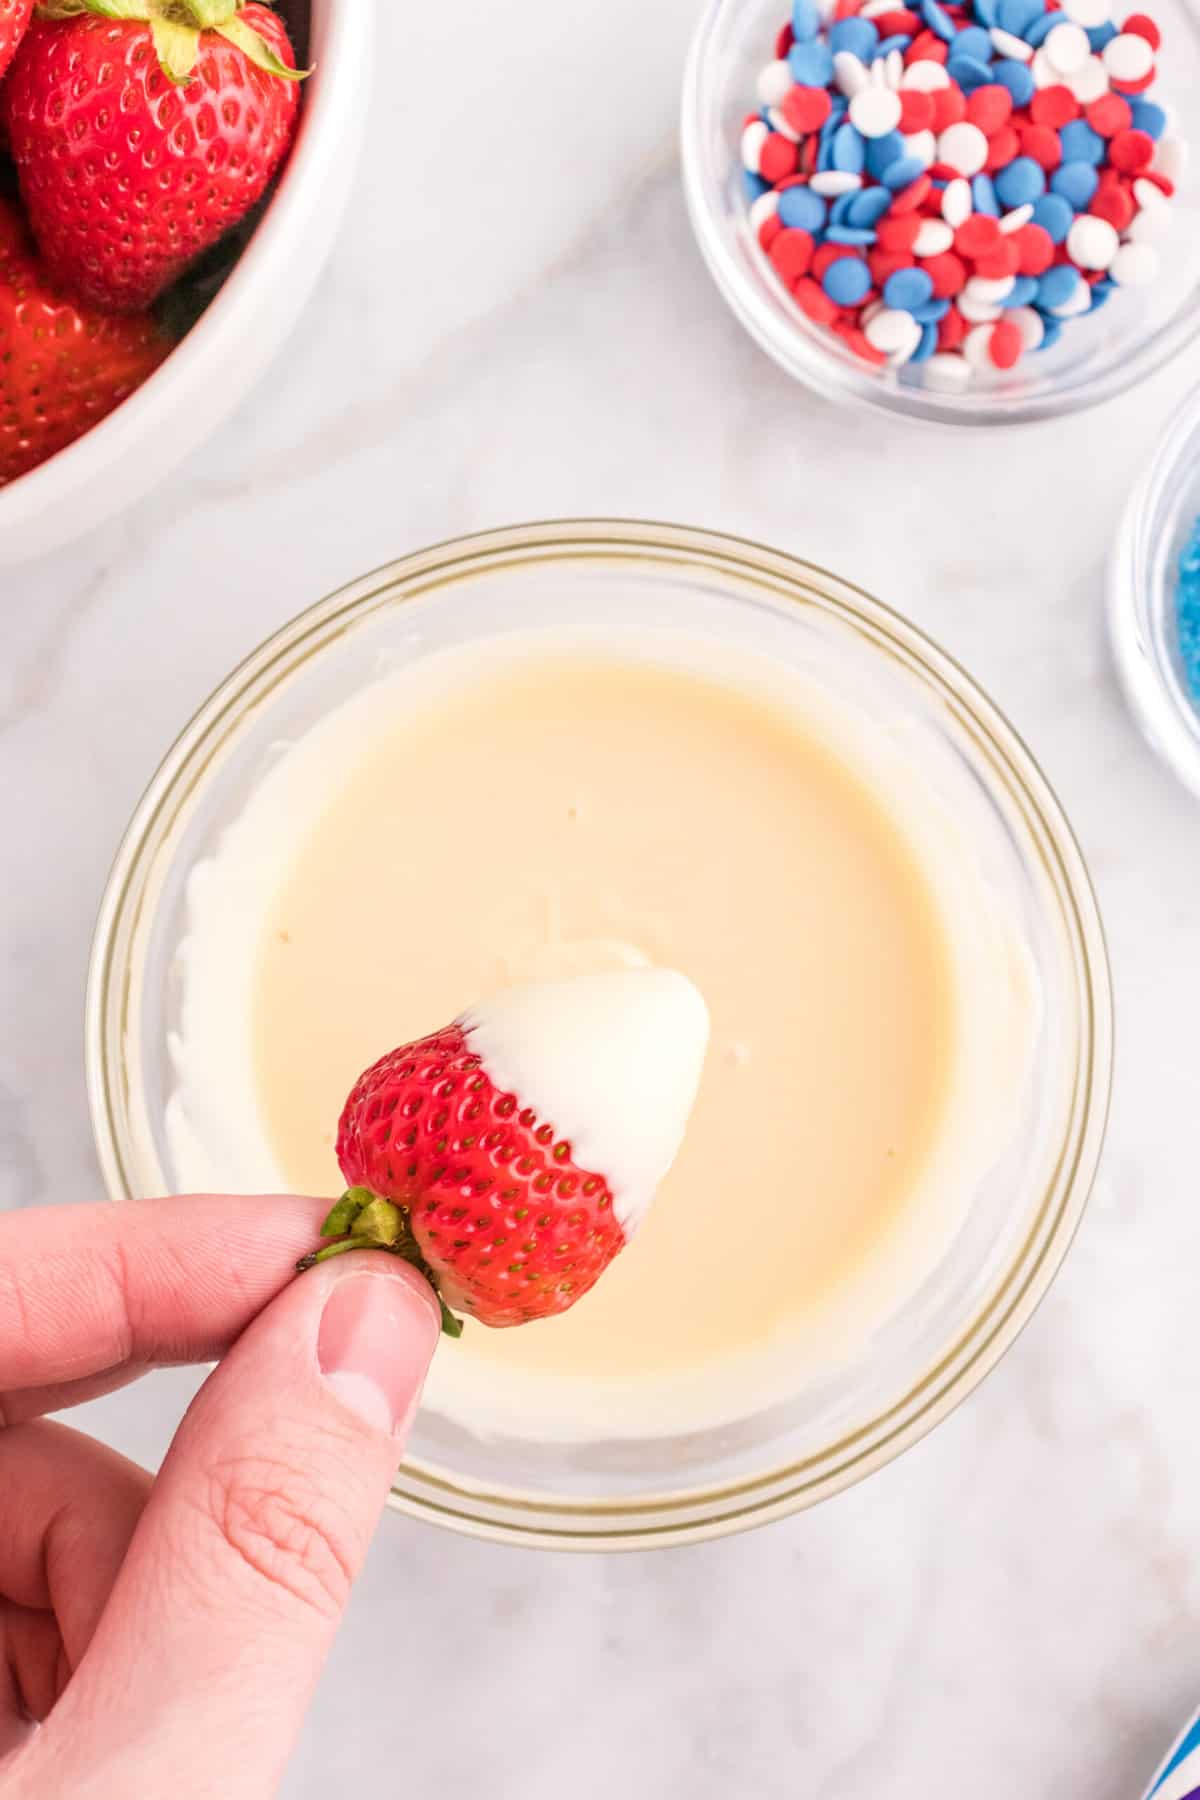 Dip the Strawberries into the white chocolate.